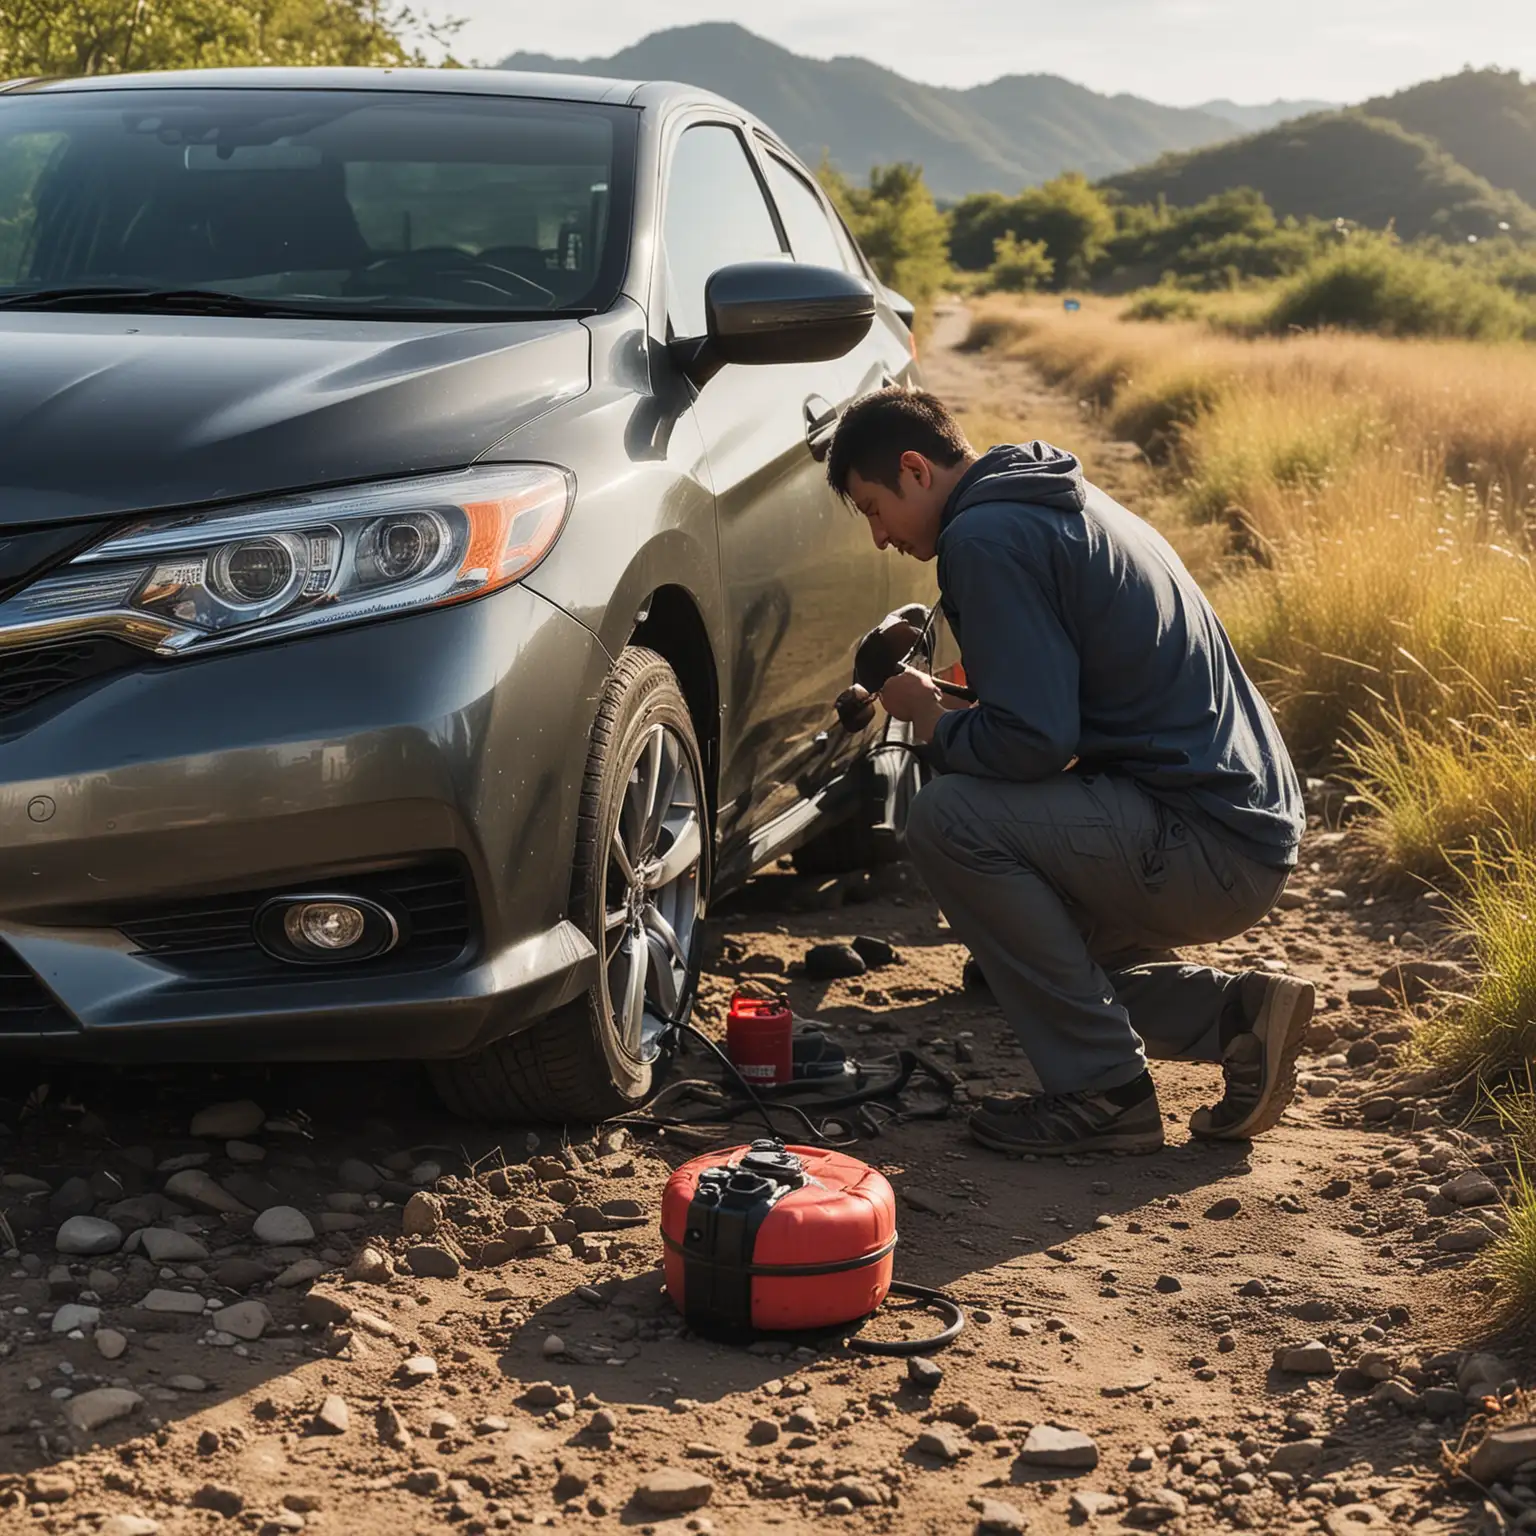 A Honda brand car is parked in the wild, a man took out an air pump and squatted next to the tire to prepare to inflate the tire, around 5 pm, sunny weather